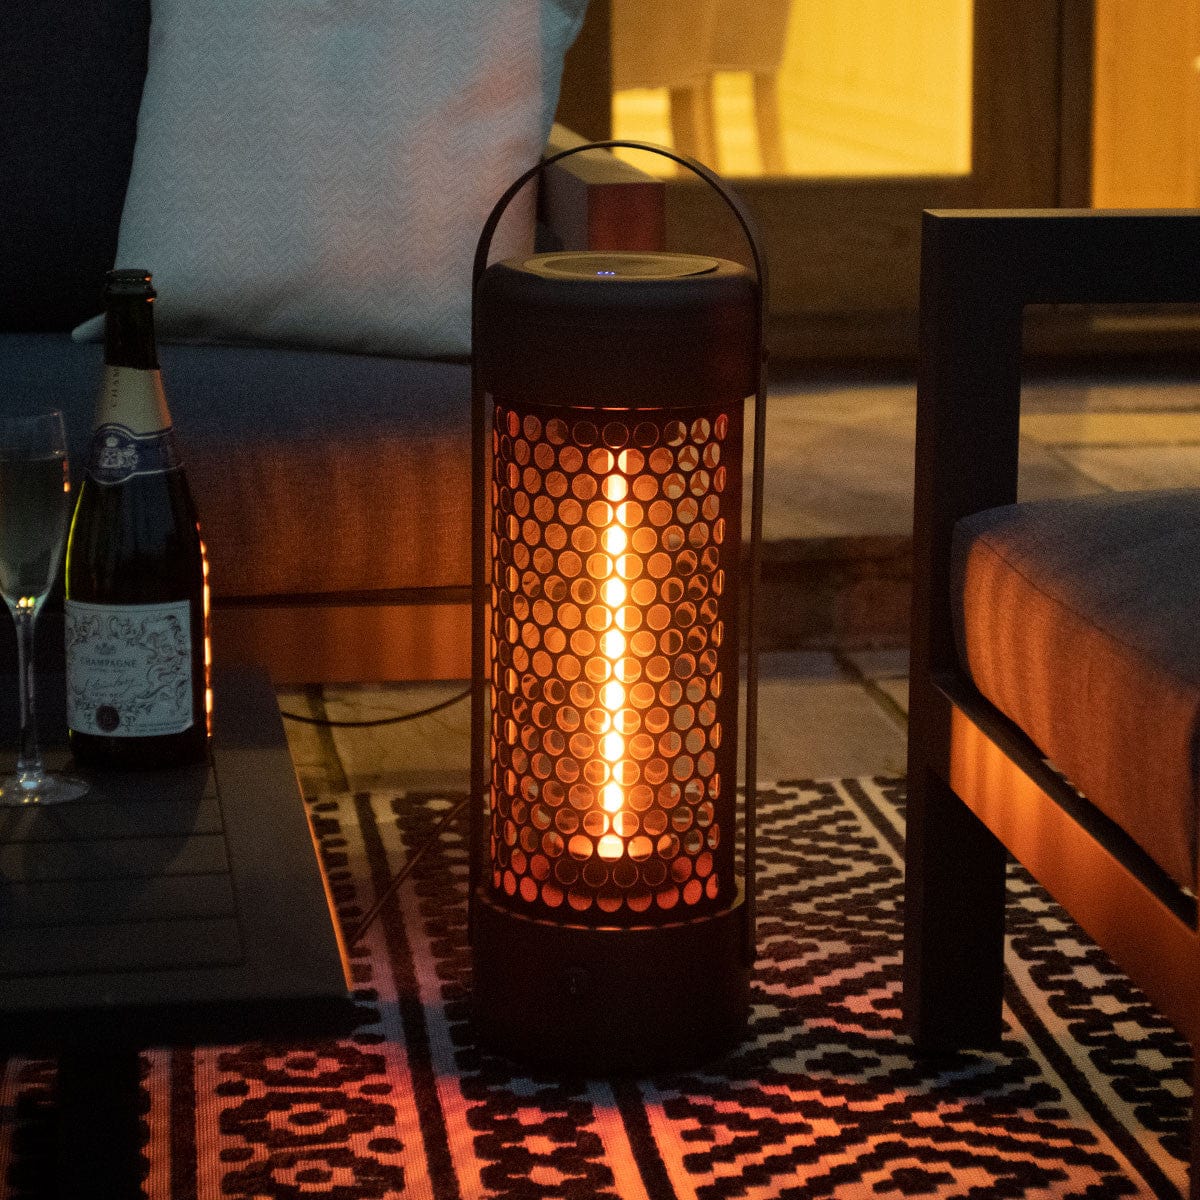 Maze Outdoors 1200W Luna Large Portable Electric Patio Heater House of Isabella UK